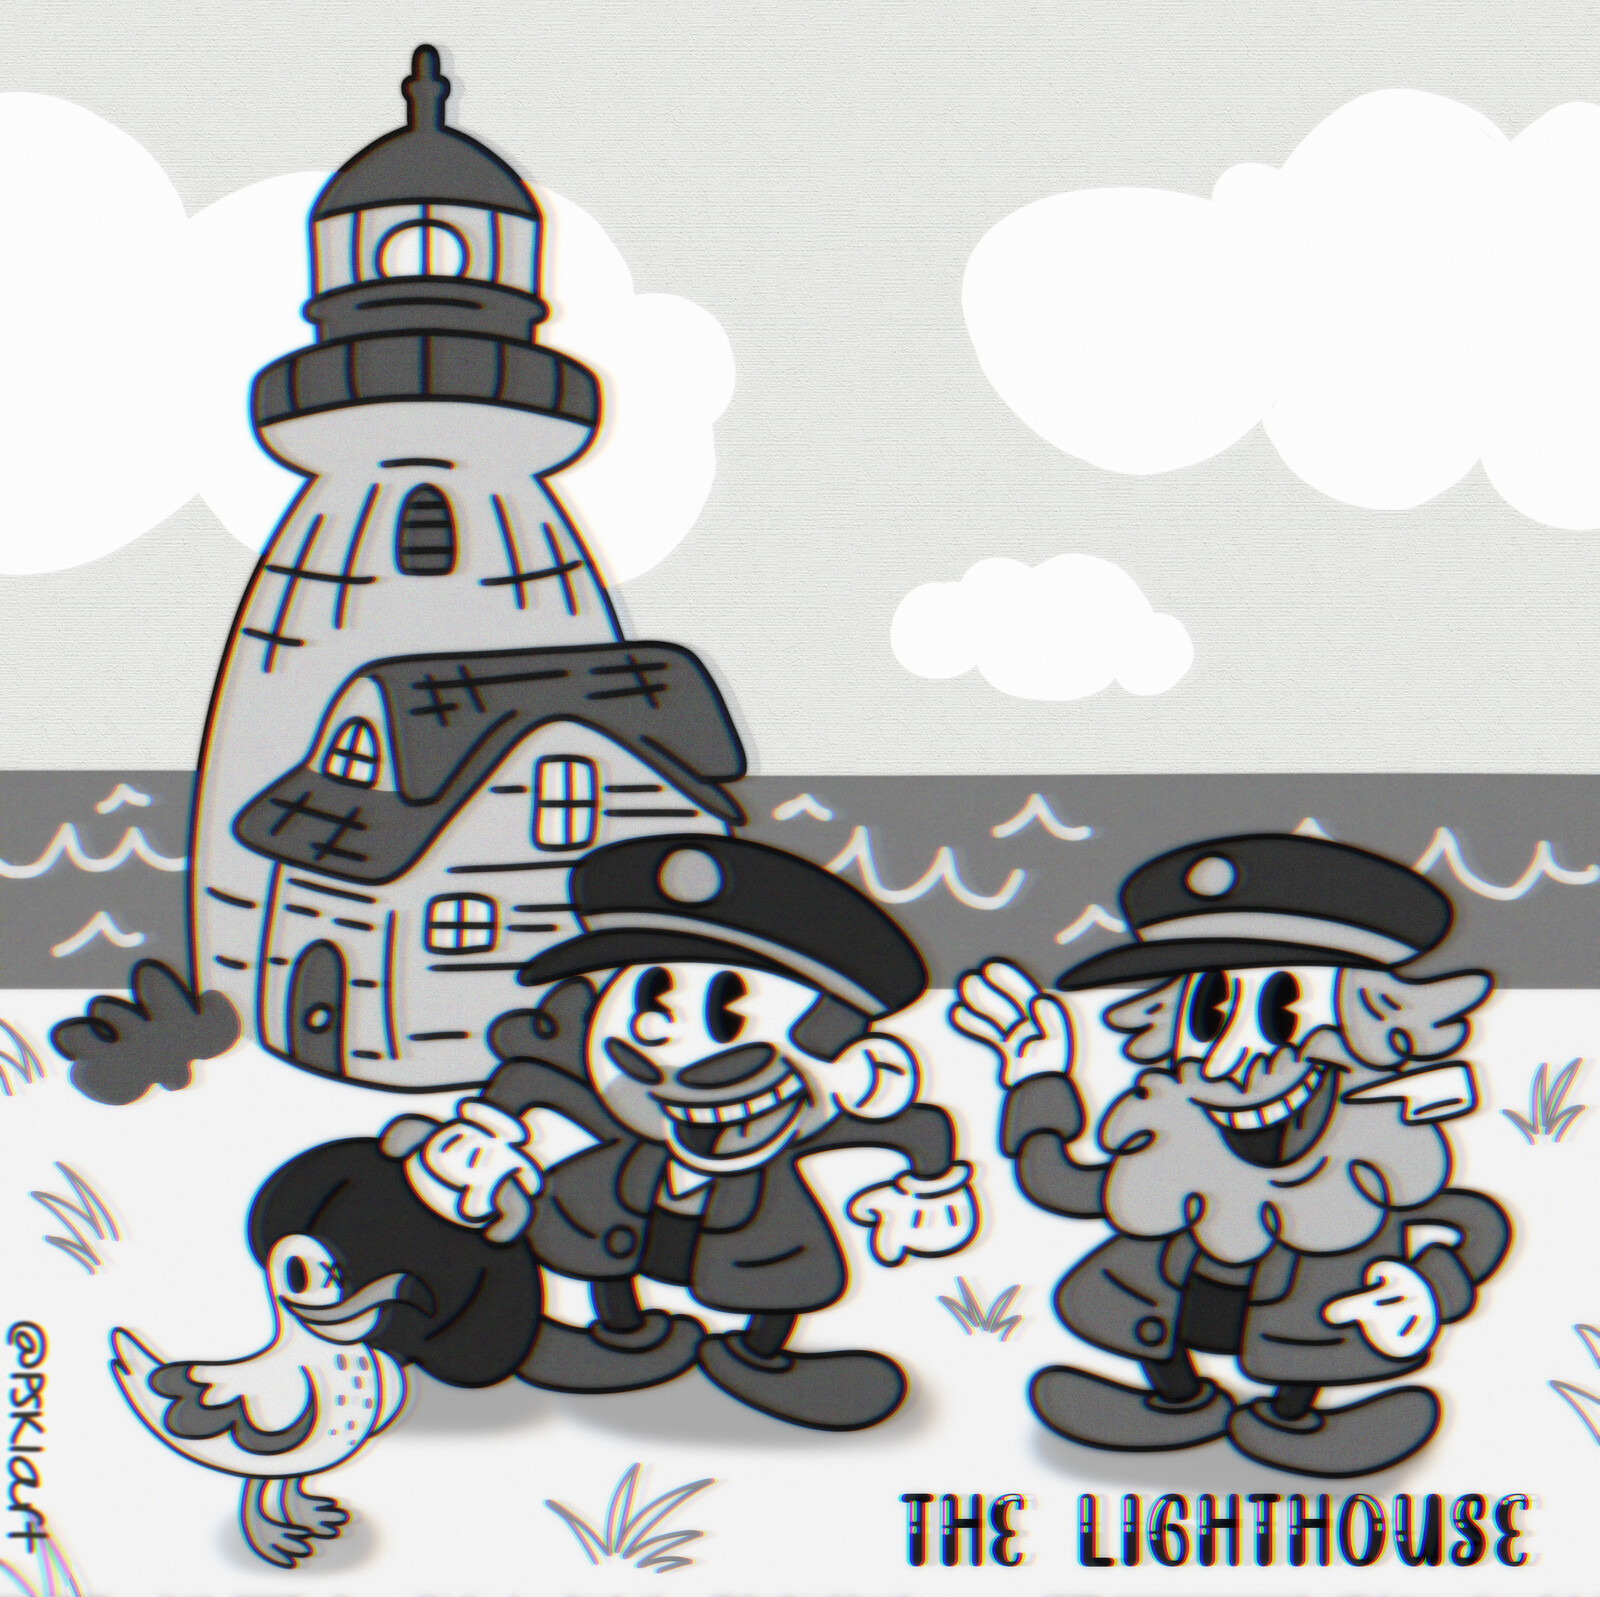 The Lighthouse: Rubber Hose Edition 